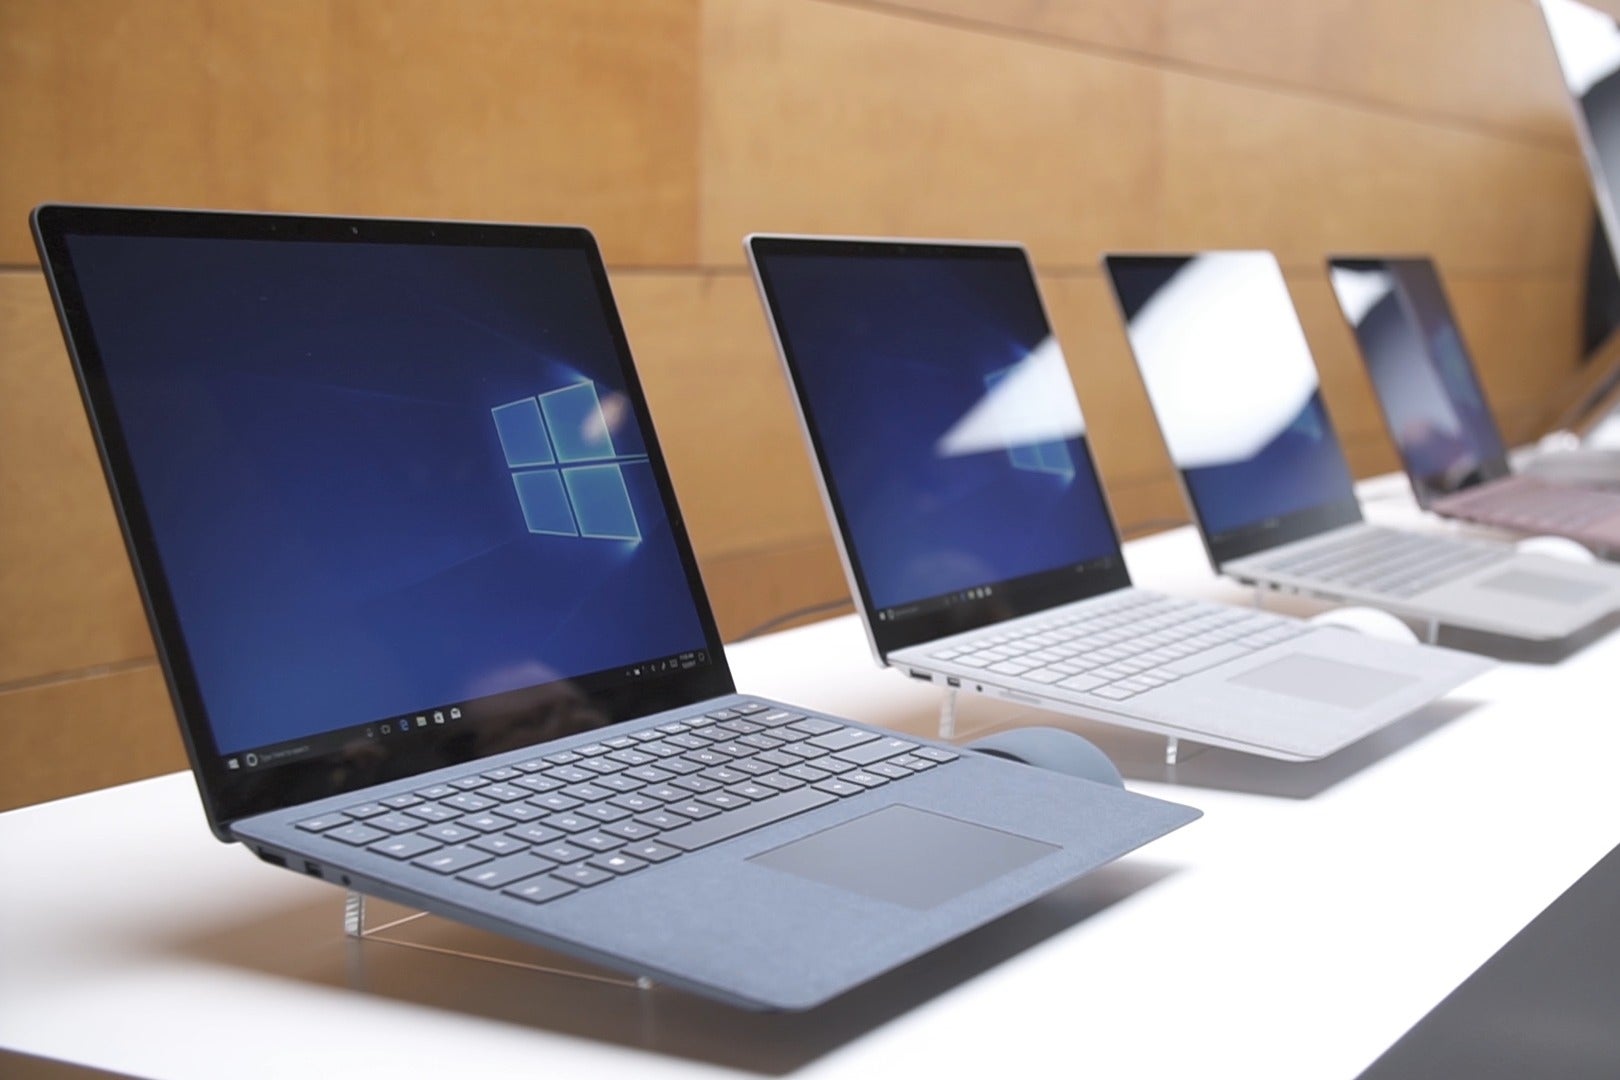 Surface Laptop vs. Surface Book We compare price, features, specs